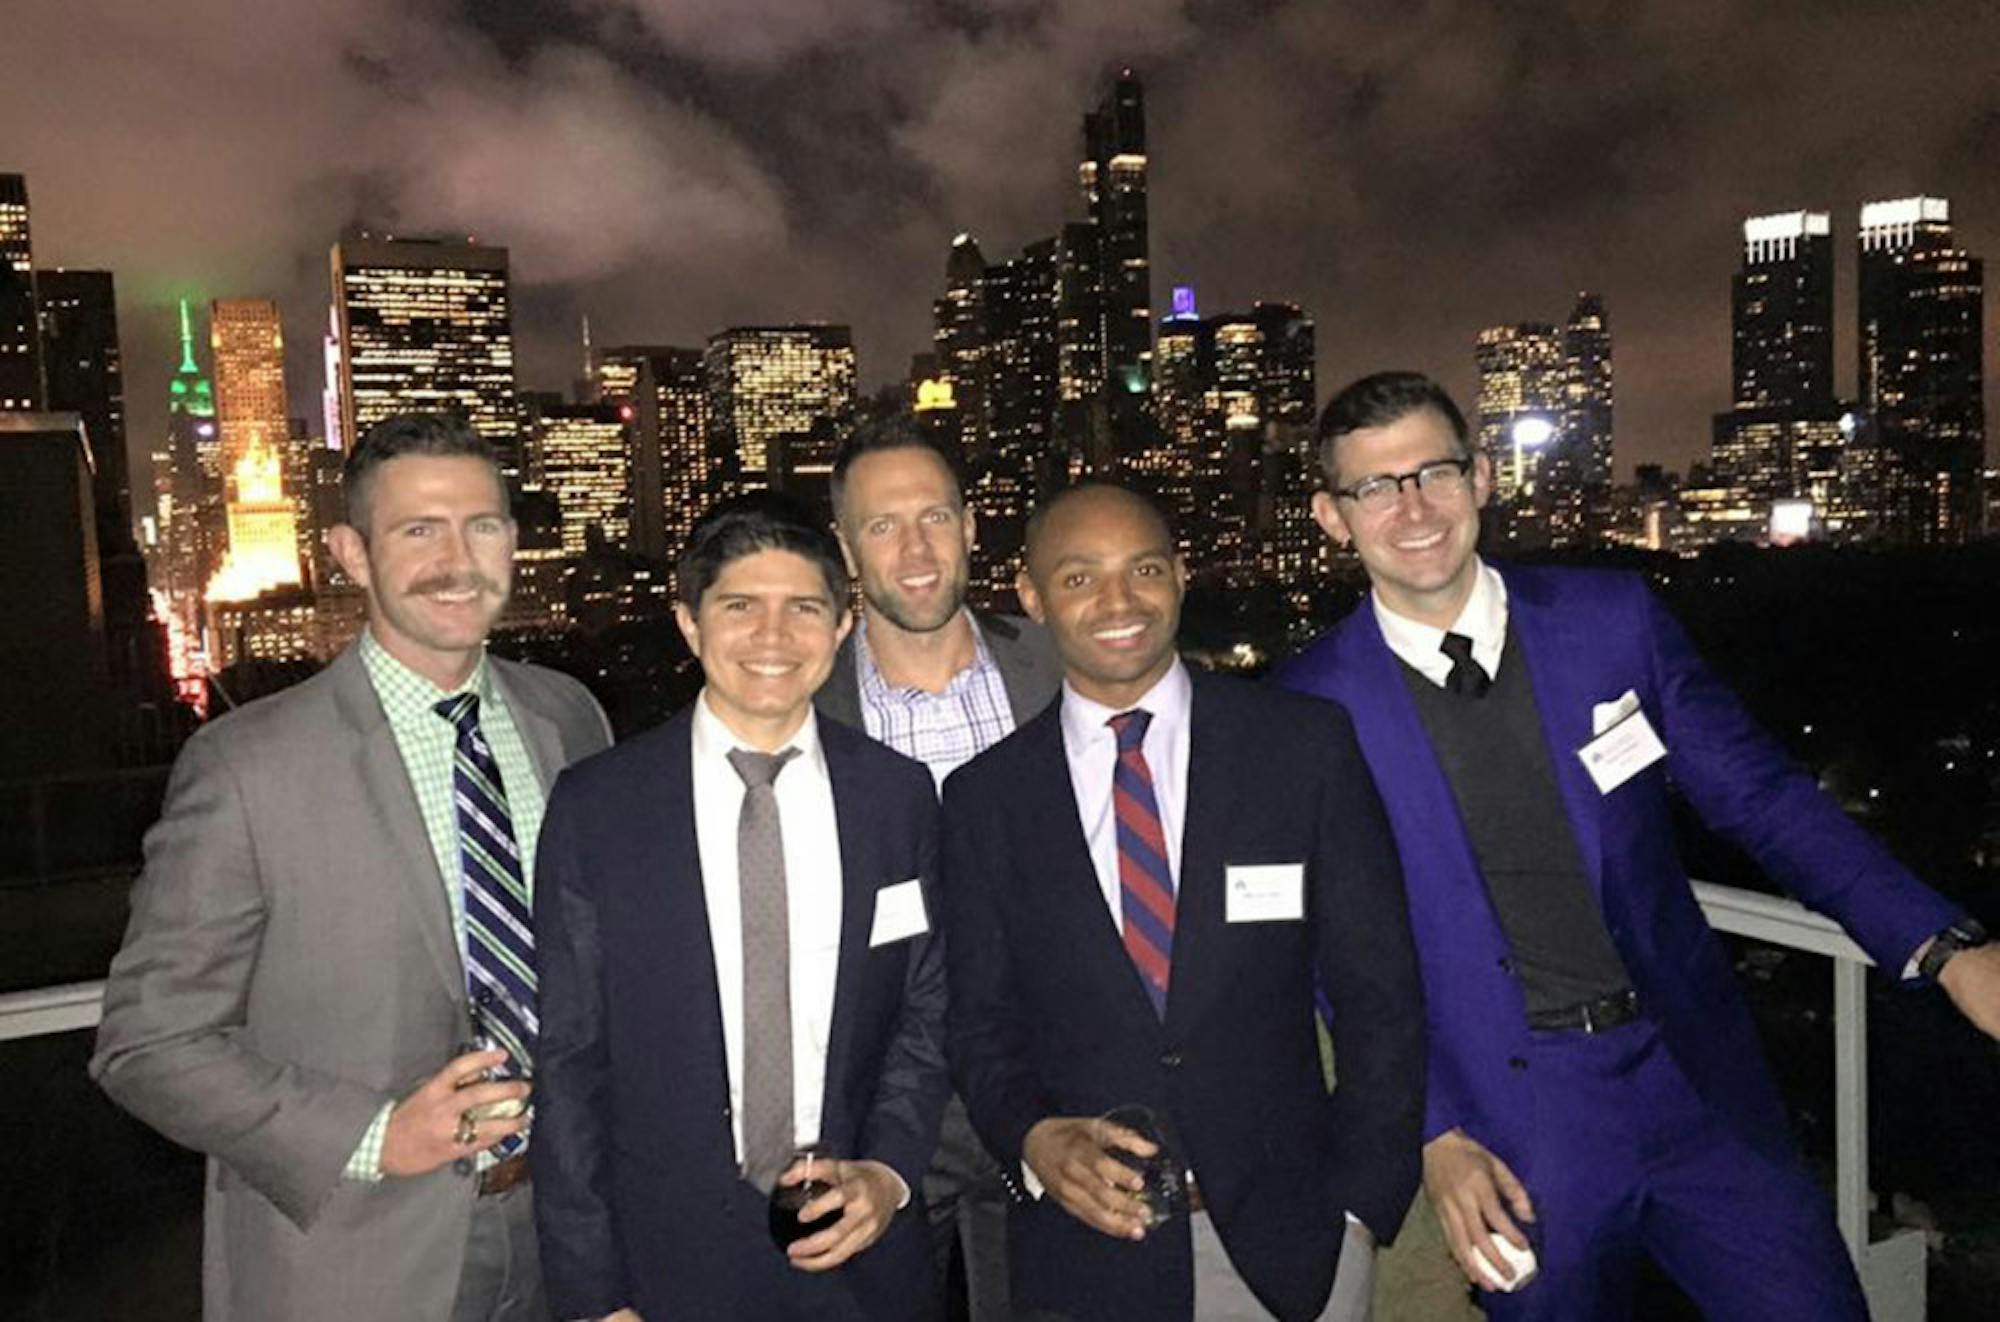 Notre Dame alumni attend a fundraising event in New York City in support of LGBTQ student scholarships for Notre Dame and Saint Mary's.